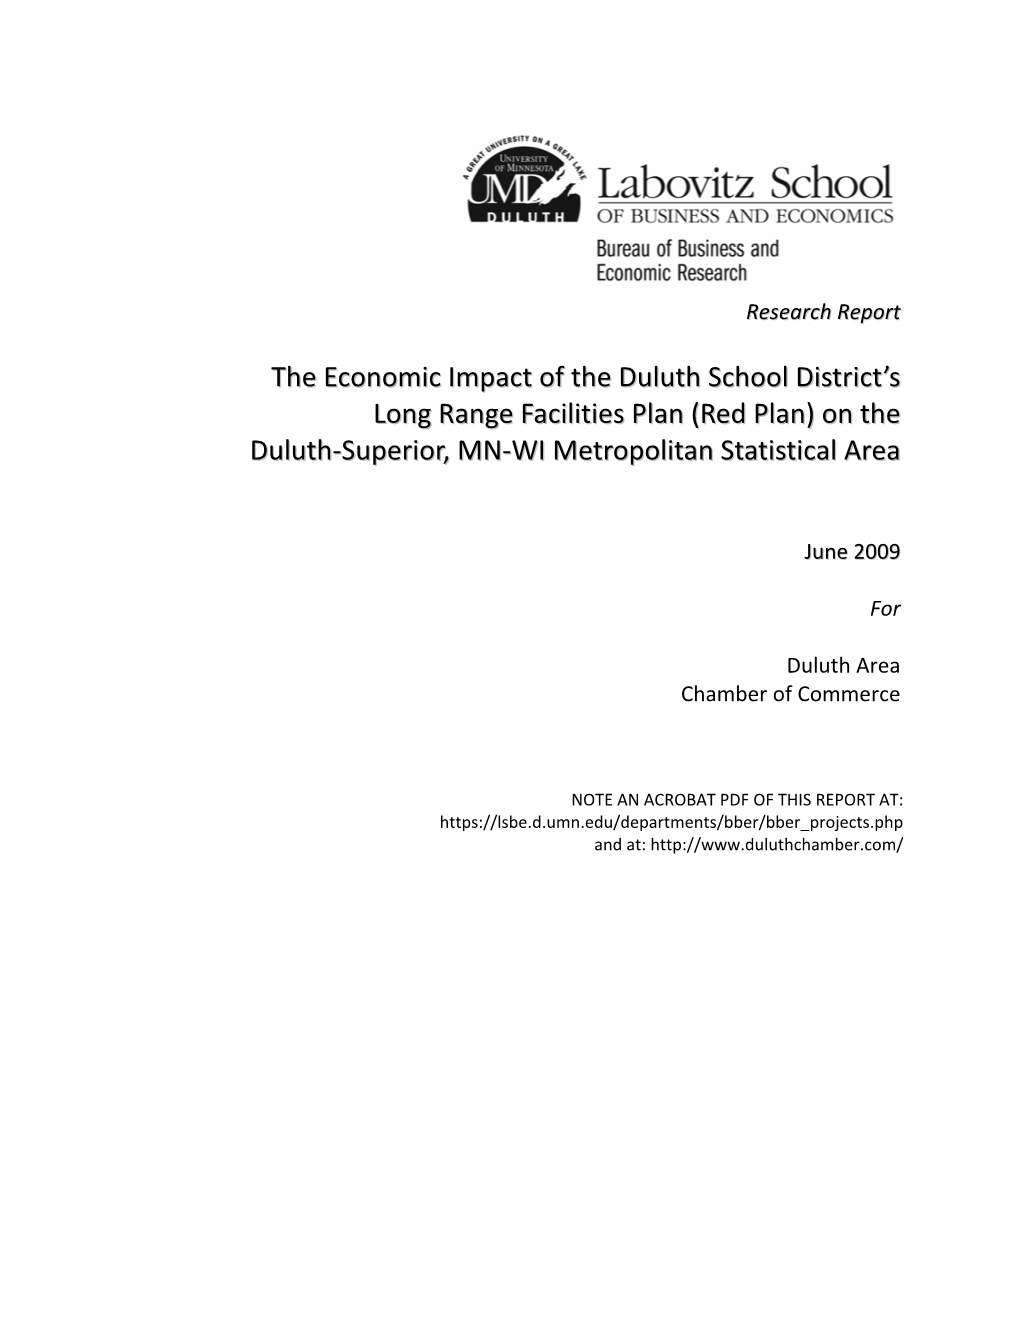 The Economic Impact of the Duluth School District's Long Range